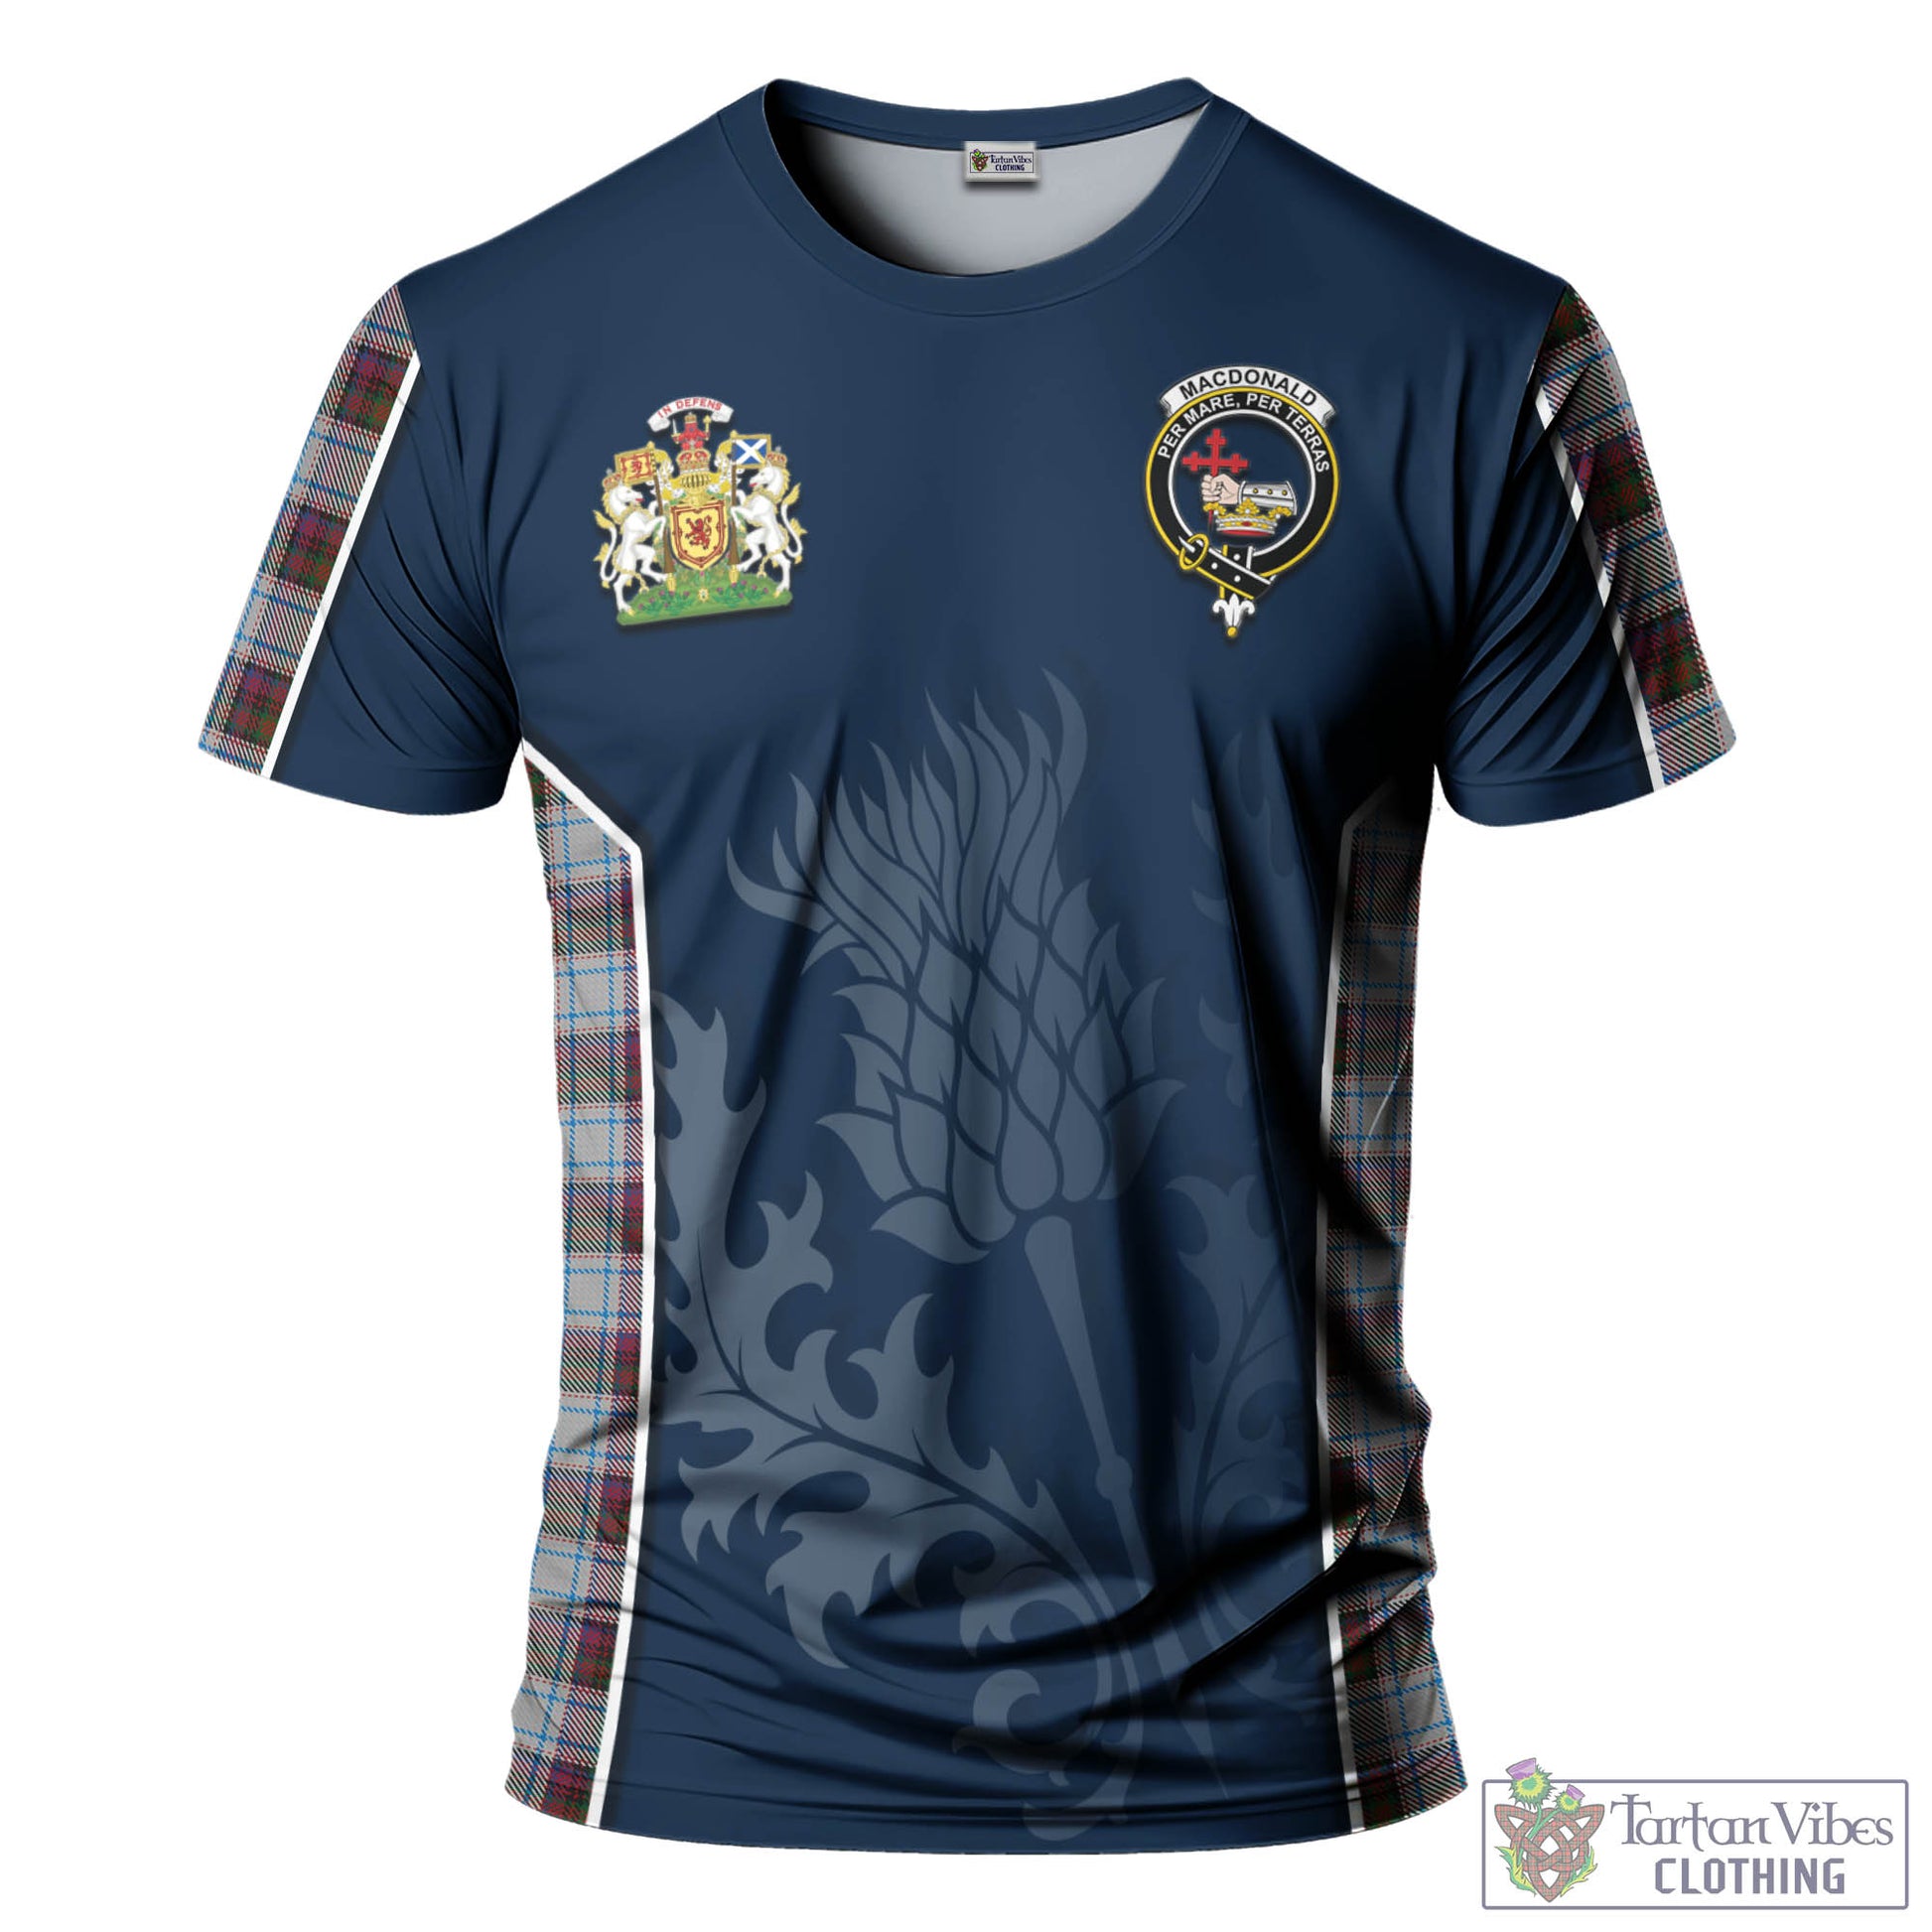 Tartan Vibes Clothing MacDonald Dress Ancient Tartan T-Shirt with Family Crest and Scottish Thistle Vibes Sport Style